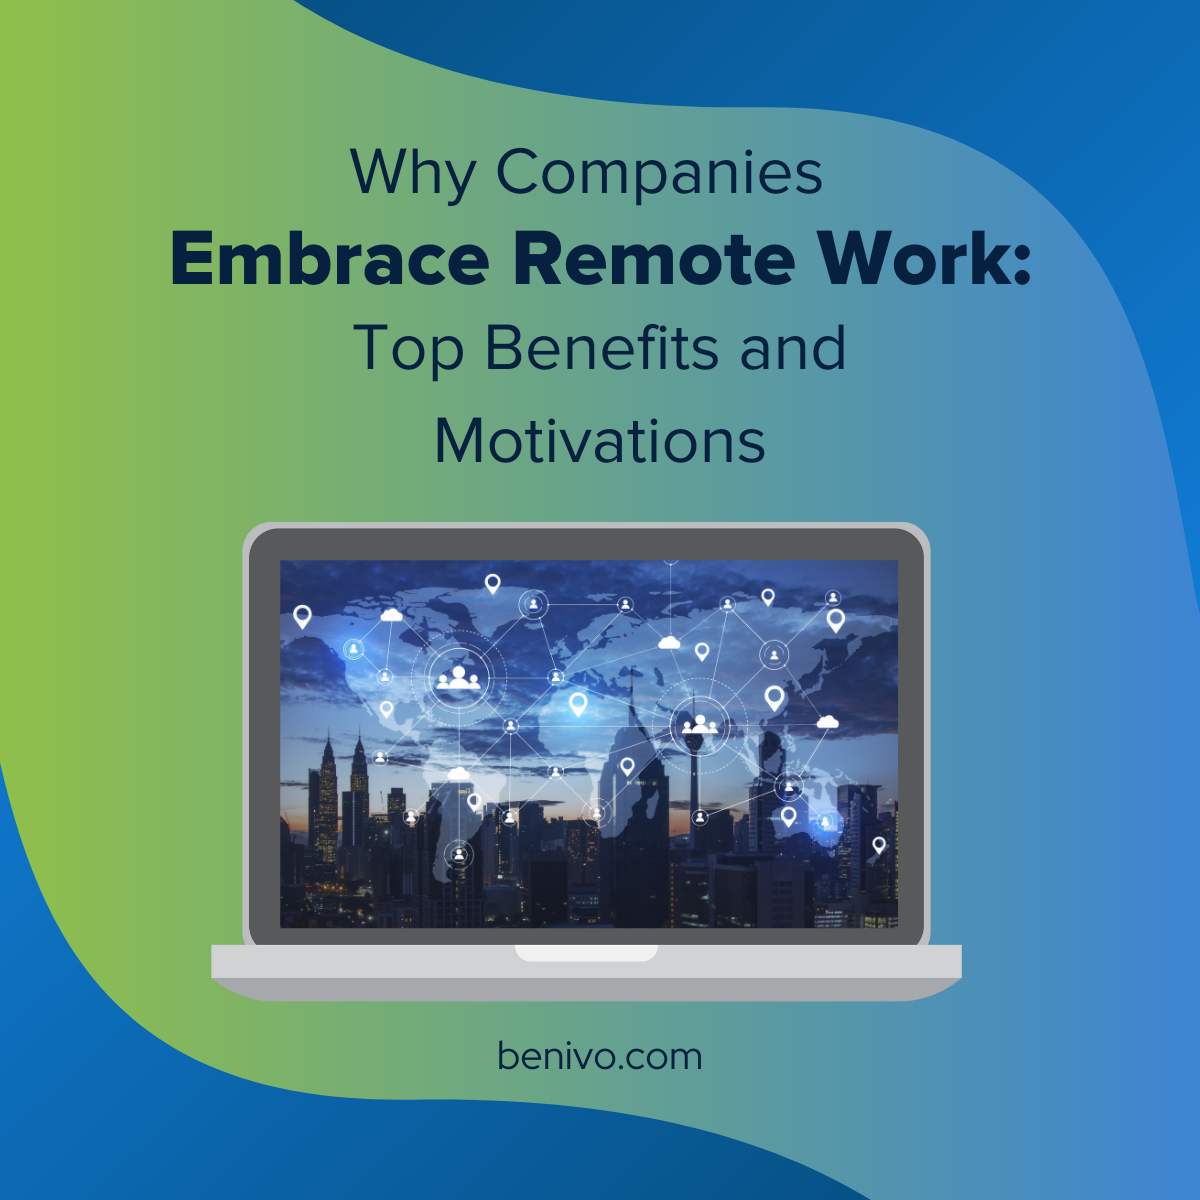 Why Companies Embrace Remote Work: Top Benefits and Motivations